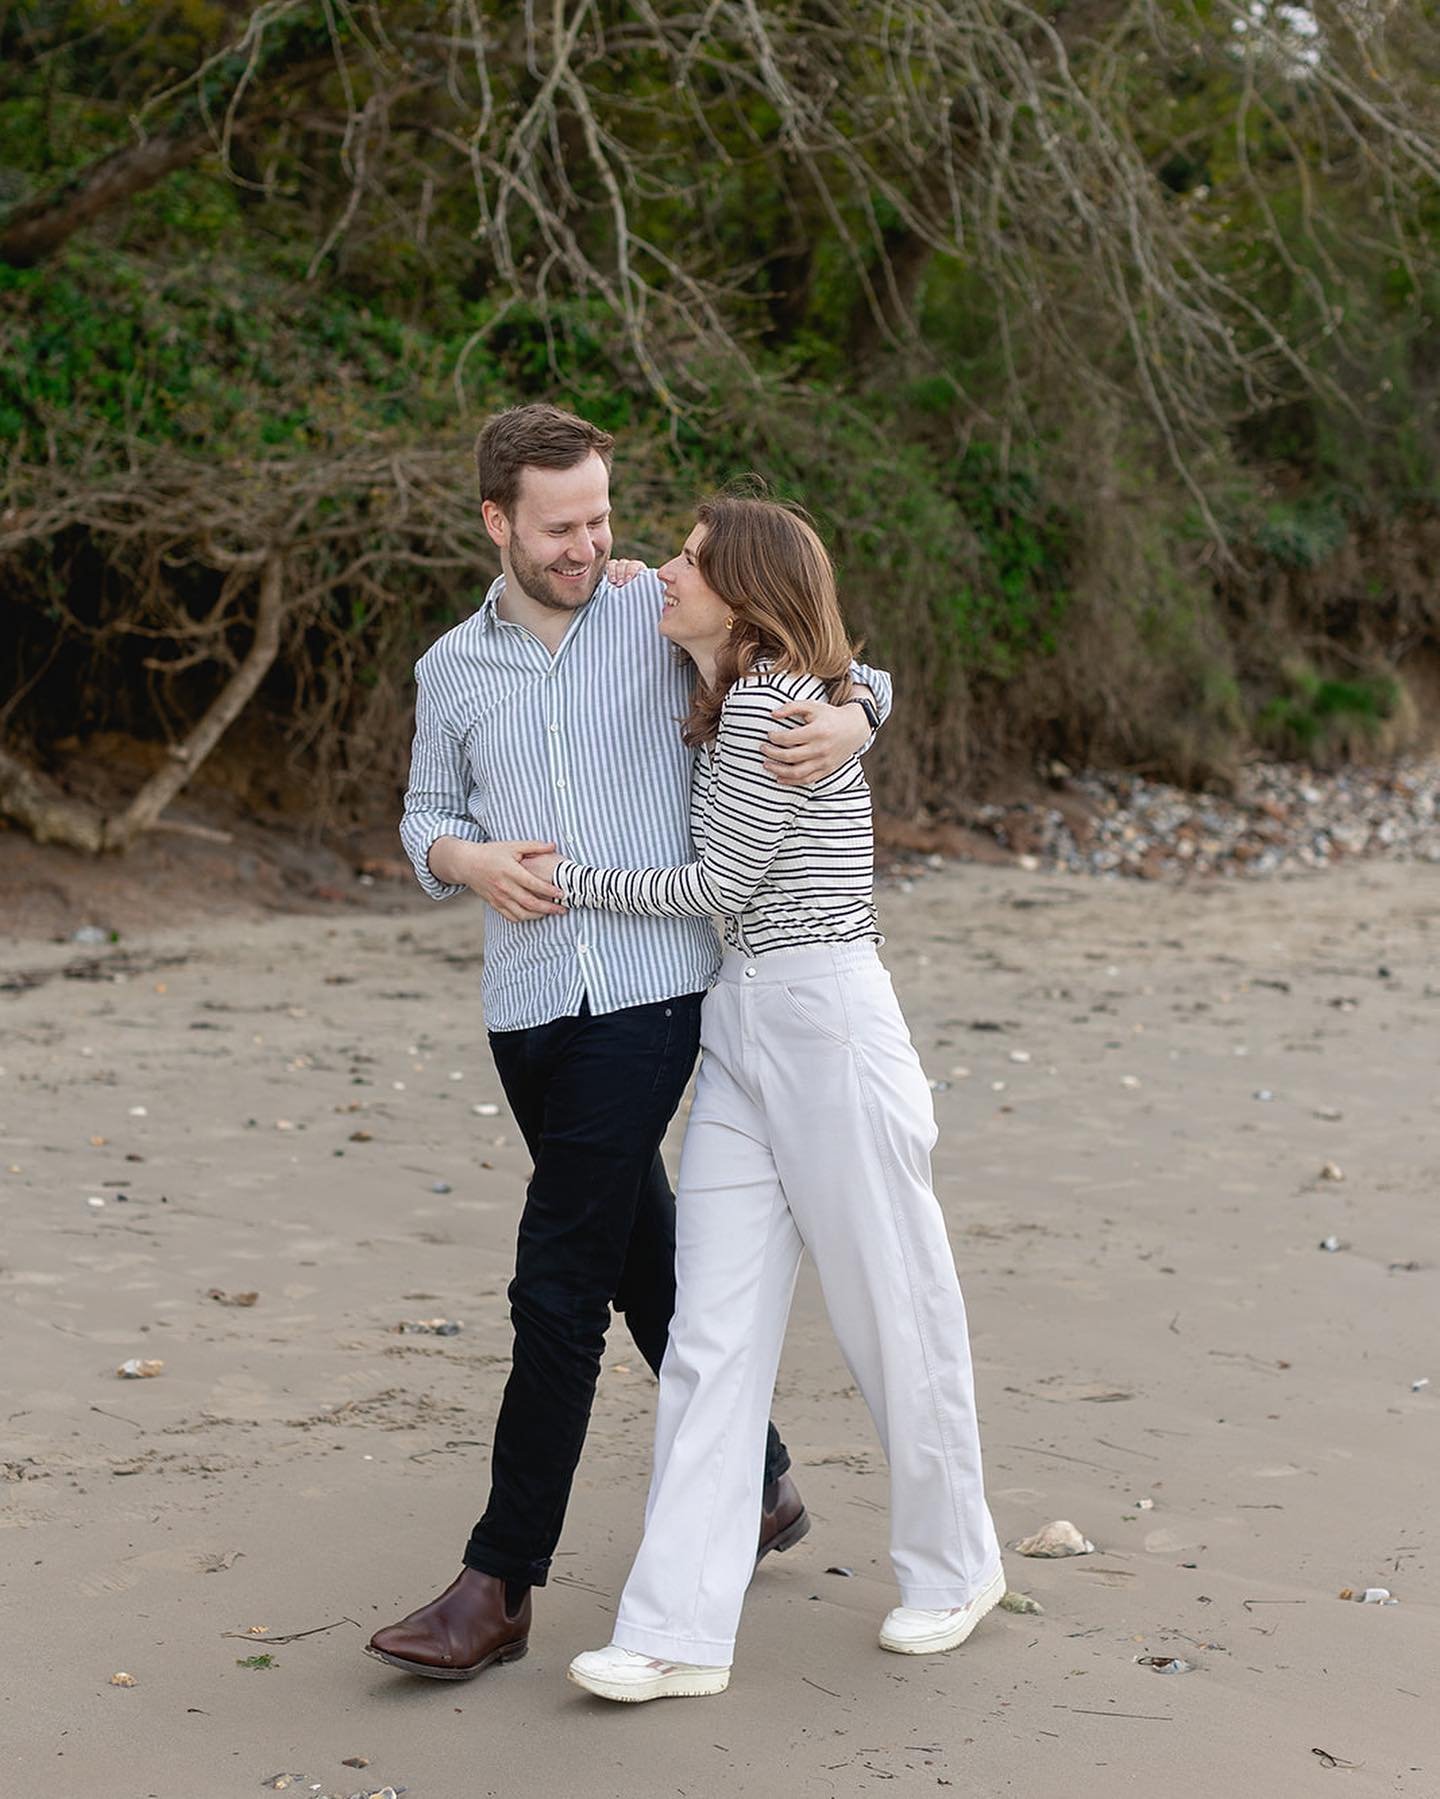 🤍One dreamy late evening with G &amp; N. I can hardly wait for their wedding in a few months time.

South Beach, Studland. 

#dorsetweddingsuppliers #southbeach #southbeachdorset #studland #dorsetweddingphotographer #photographerindorset #engagement